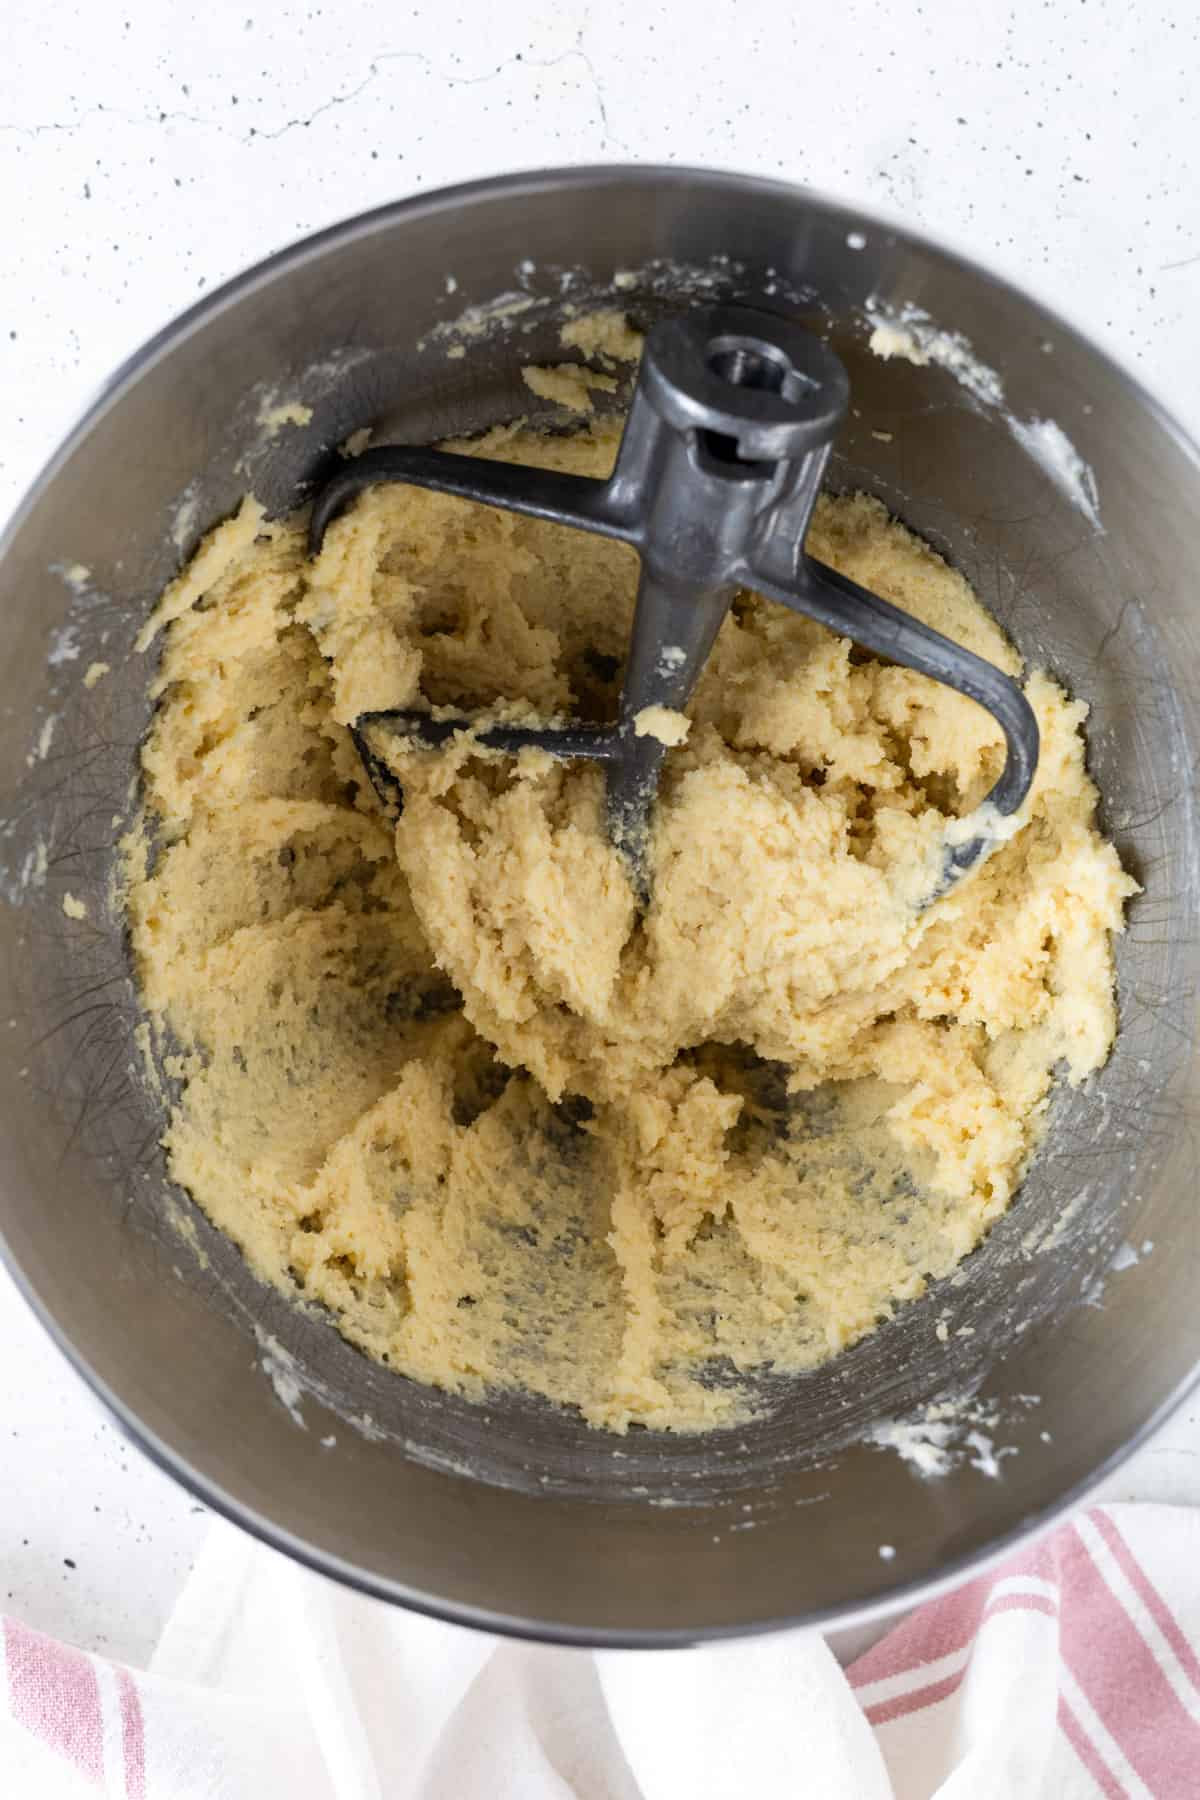 The butter-sugar mixture with almond flour mixed in a bowl with a paddle attachment.